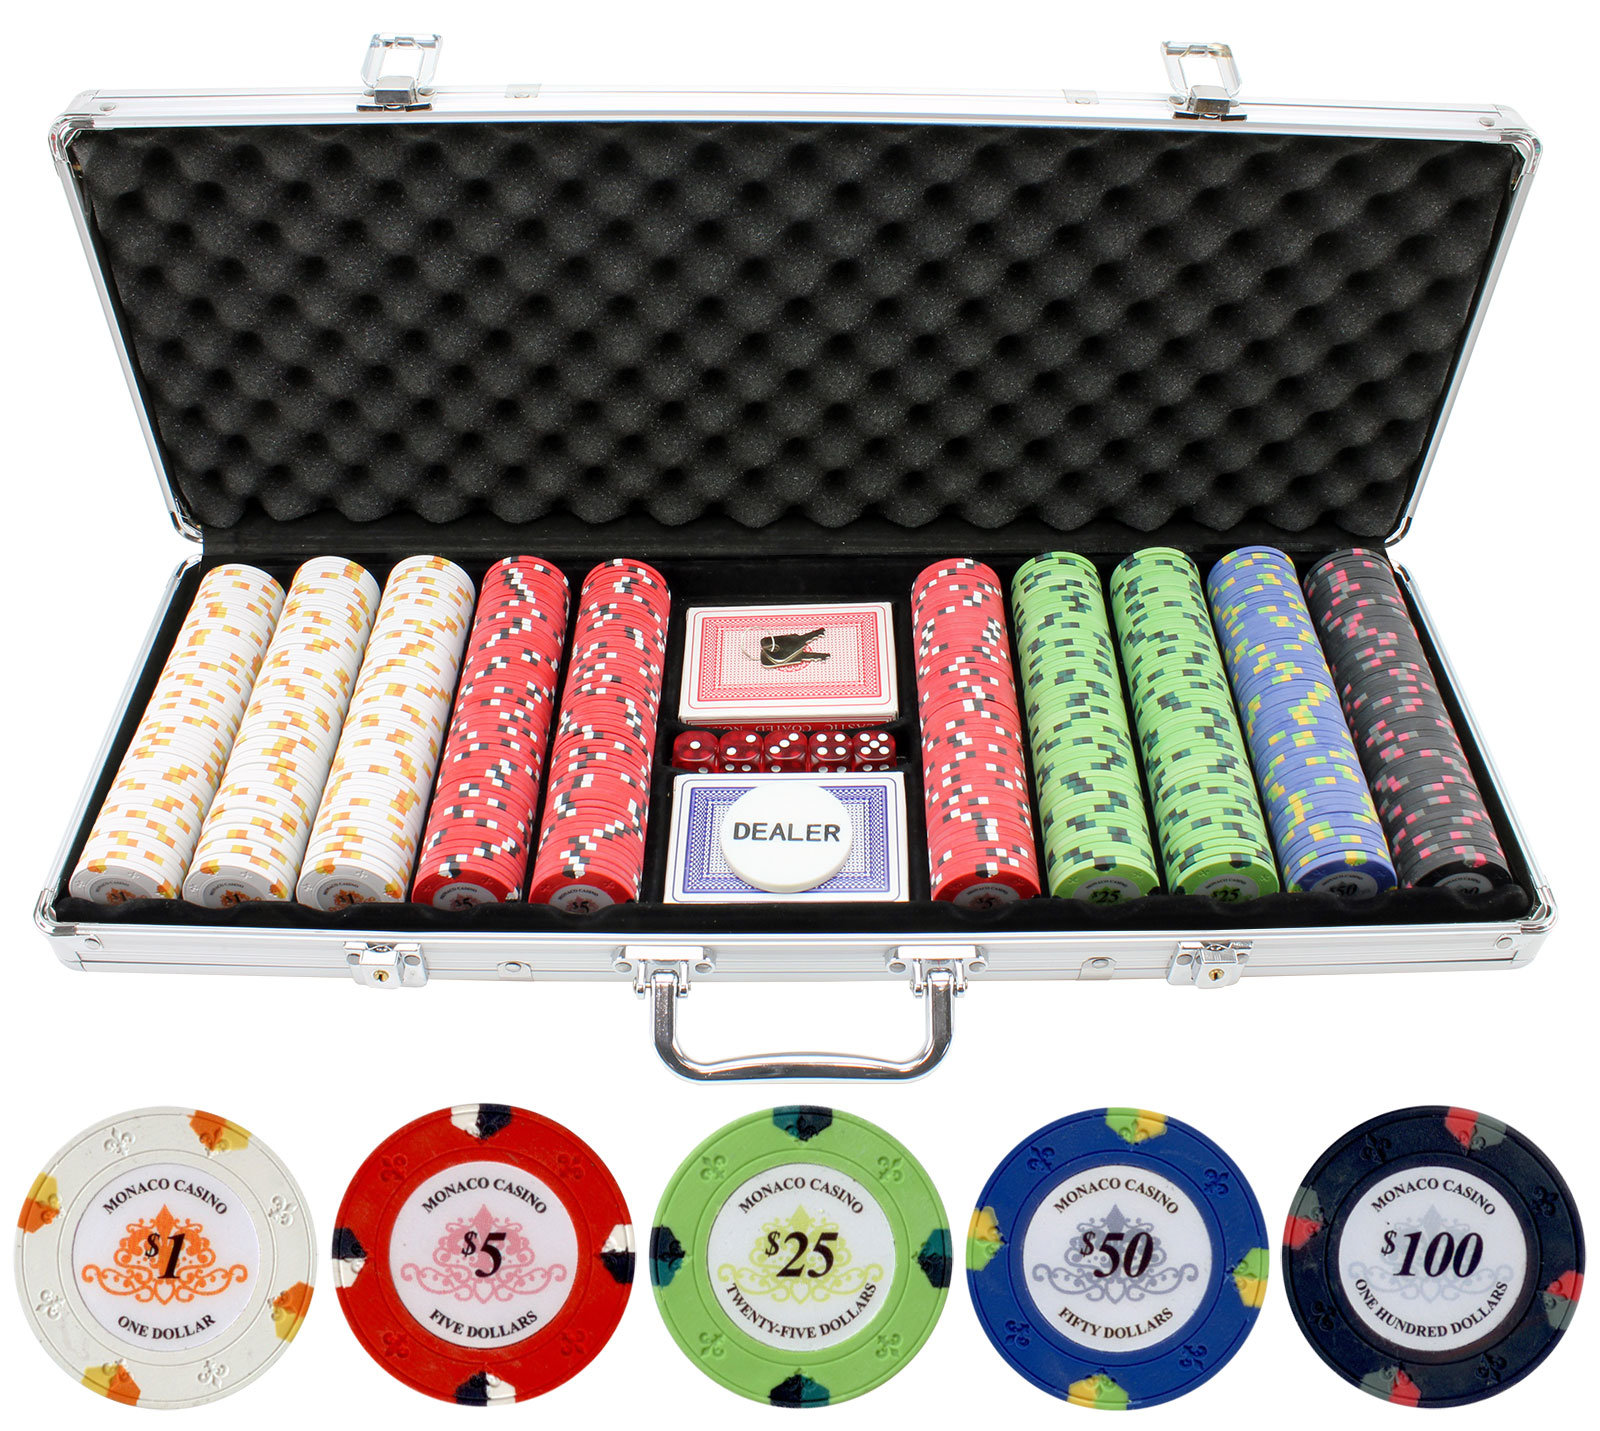 100pcs Ultimate Casino Laser Clay Poker Chips $50 